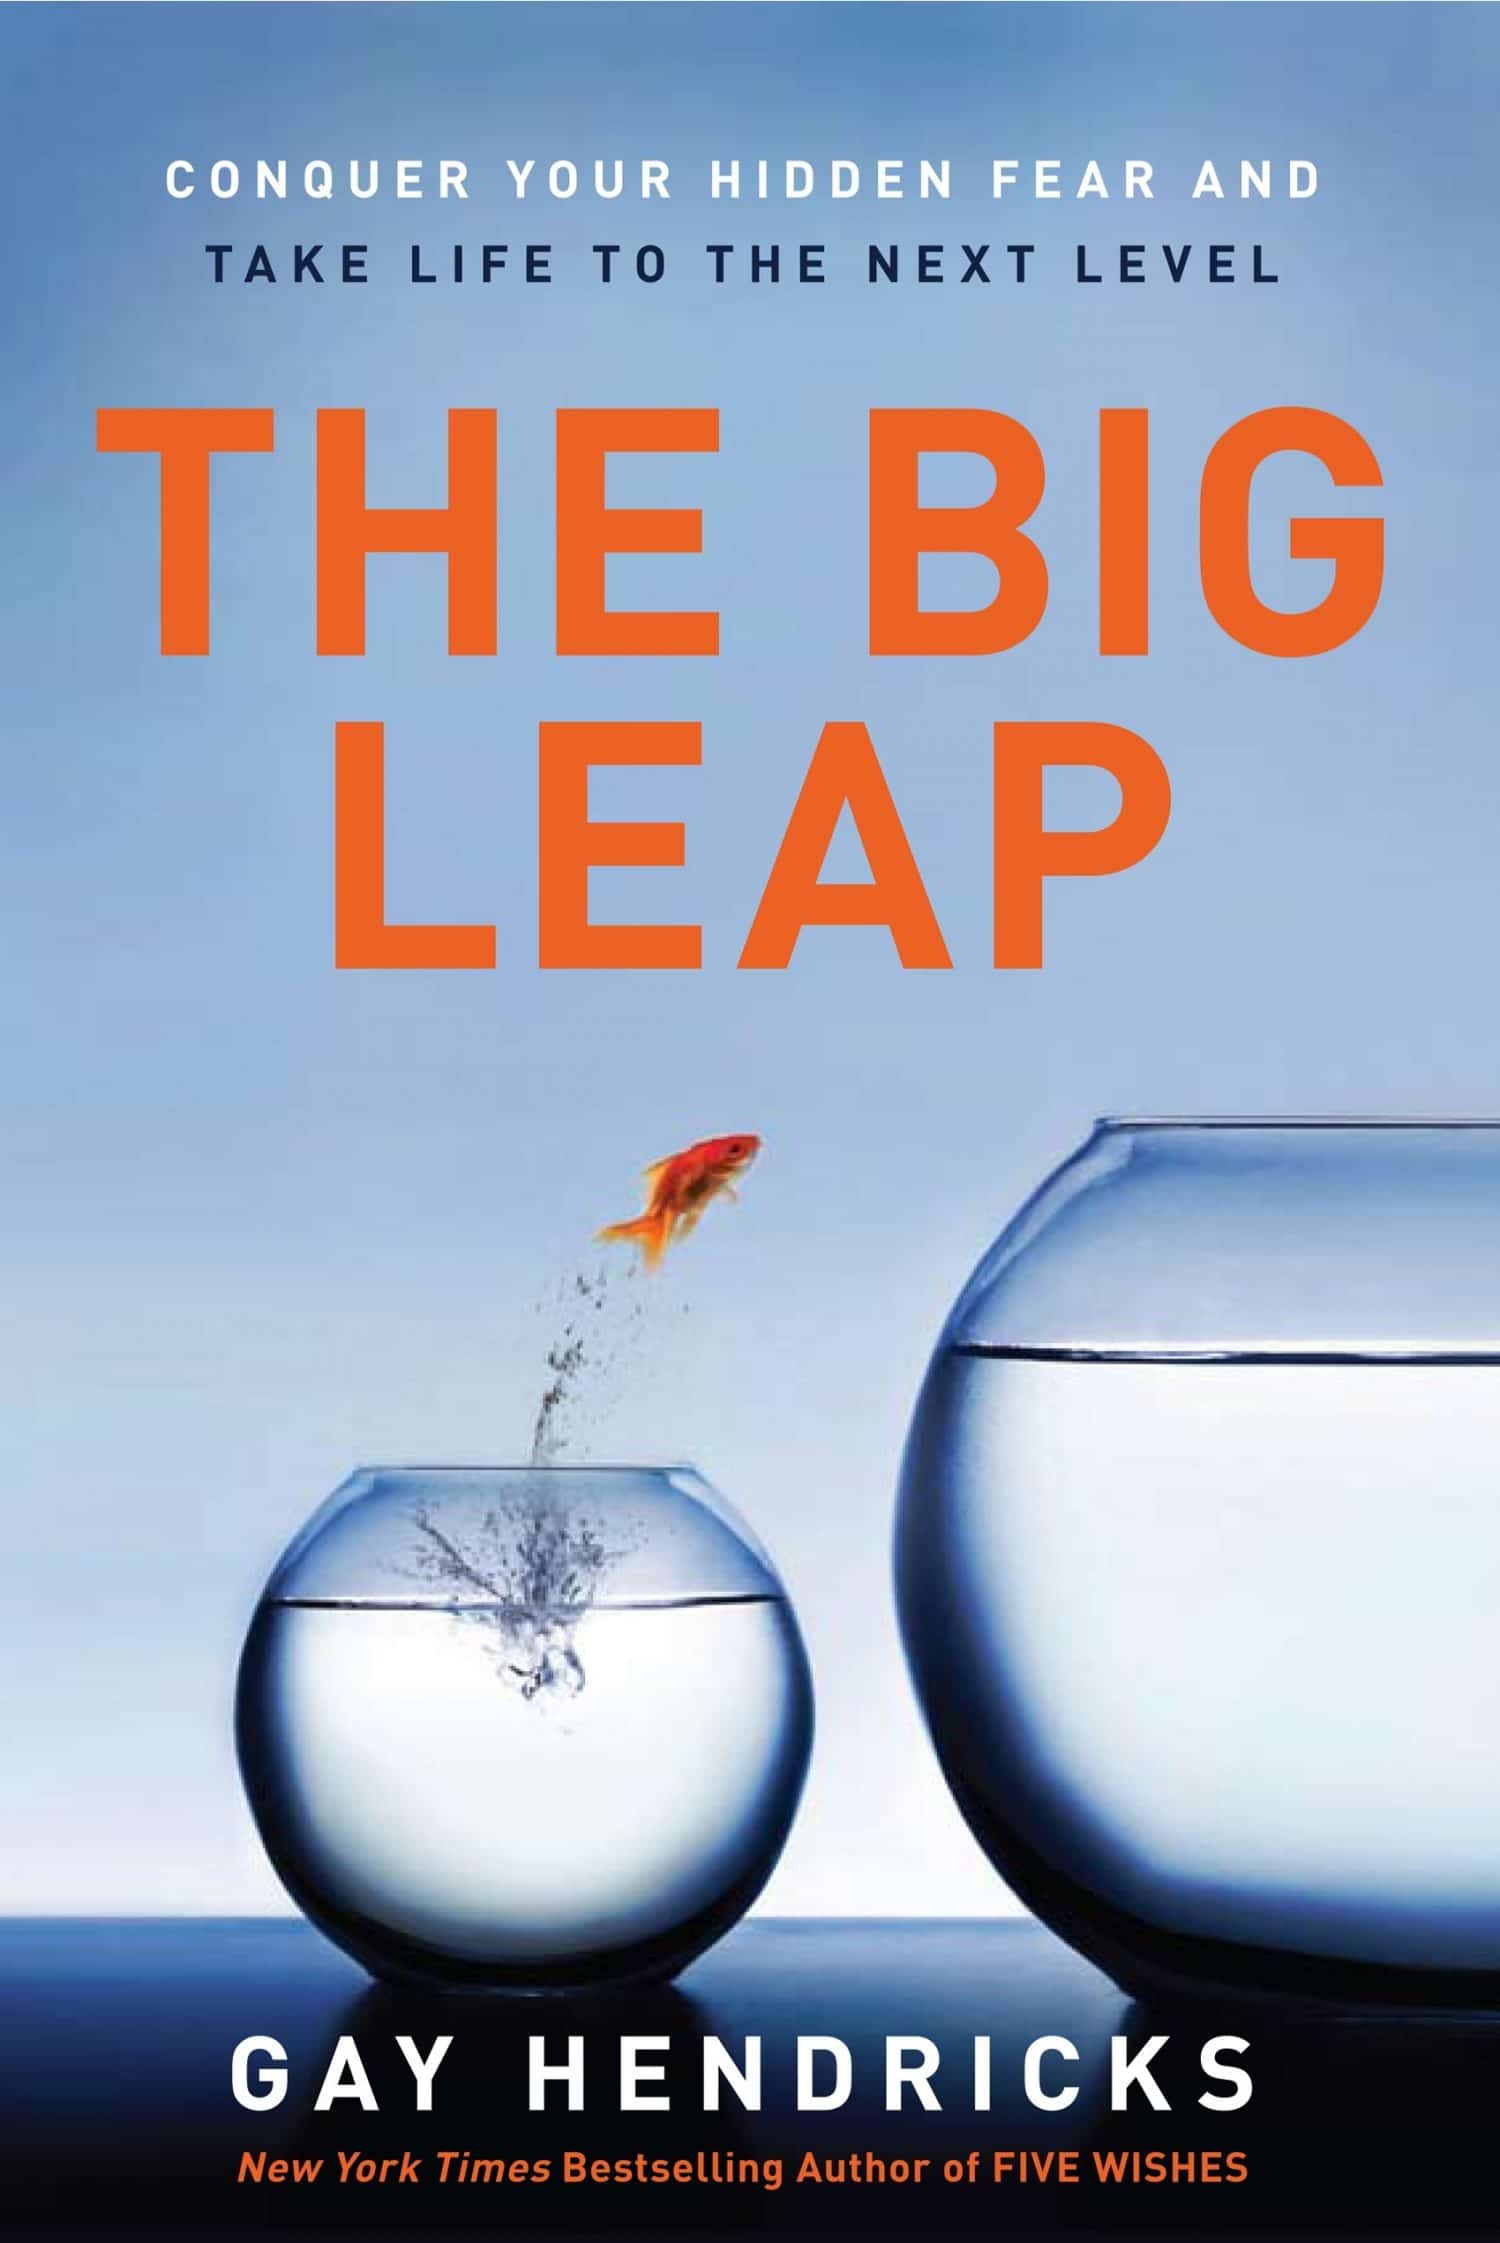 My issues with “The Big Leap” ~a book review